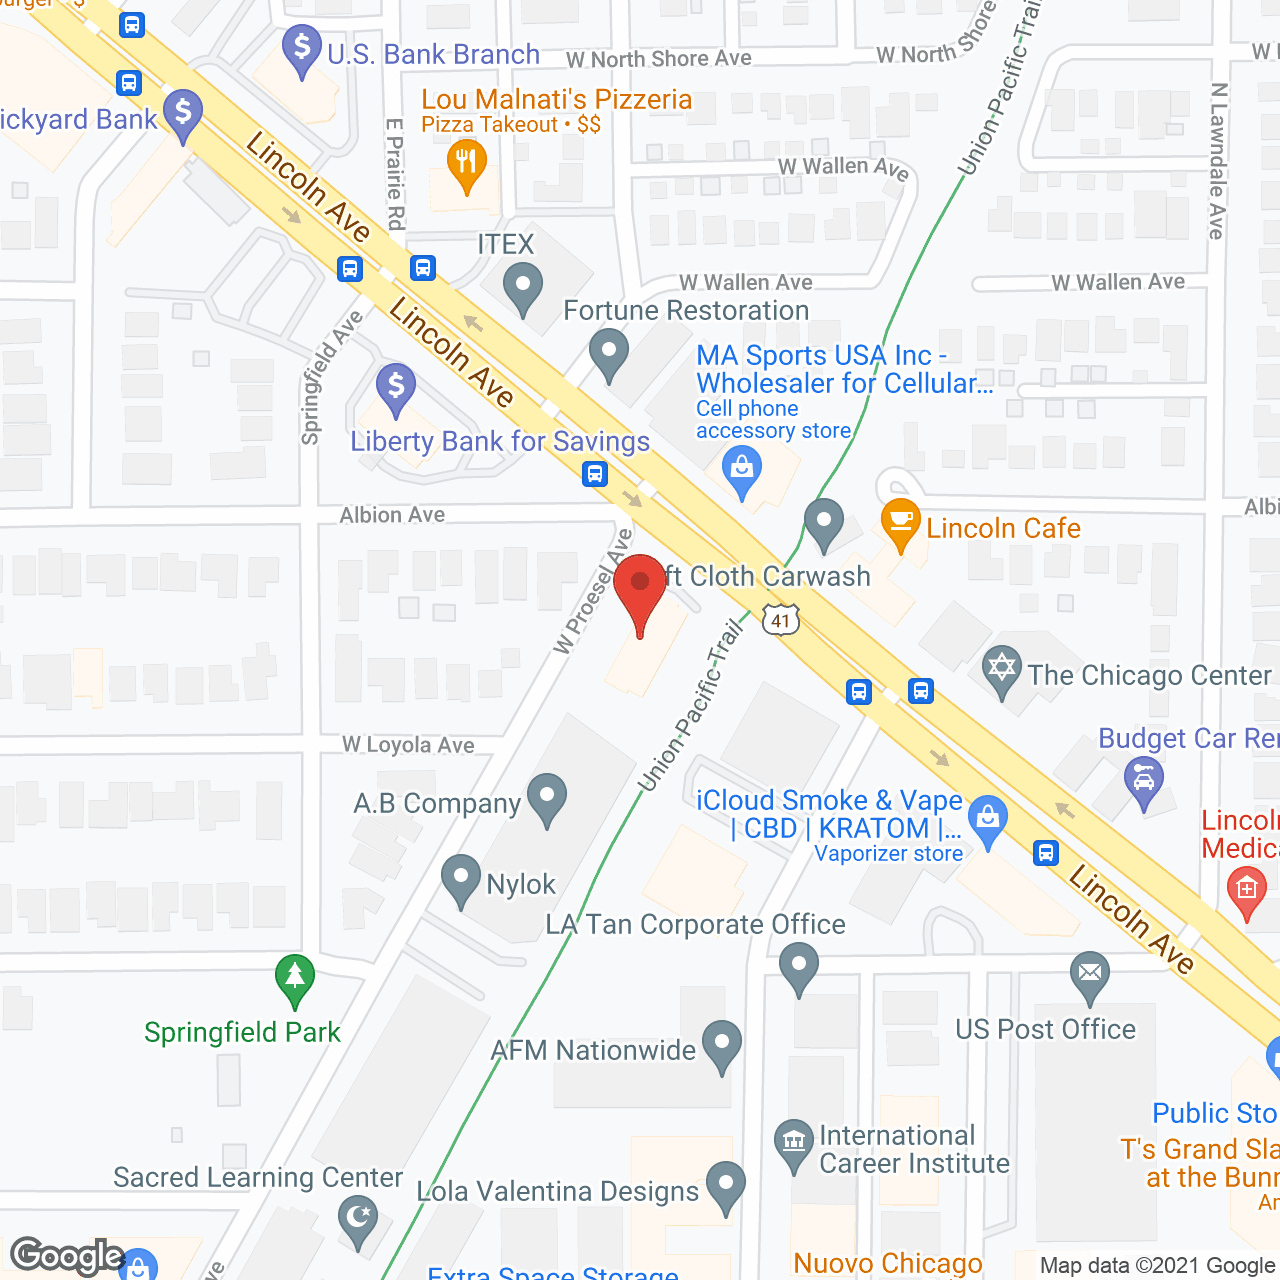 3Cross Home Care Corp in google map